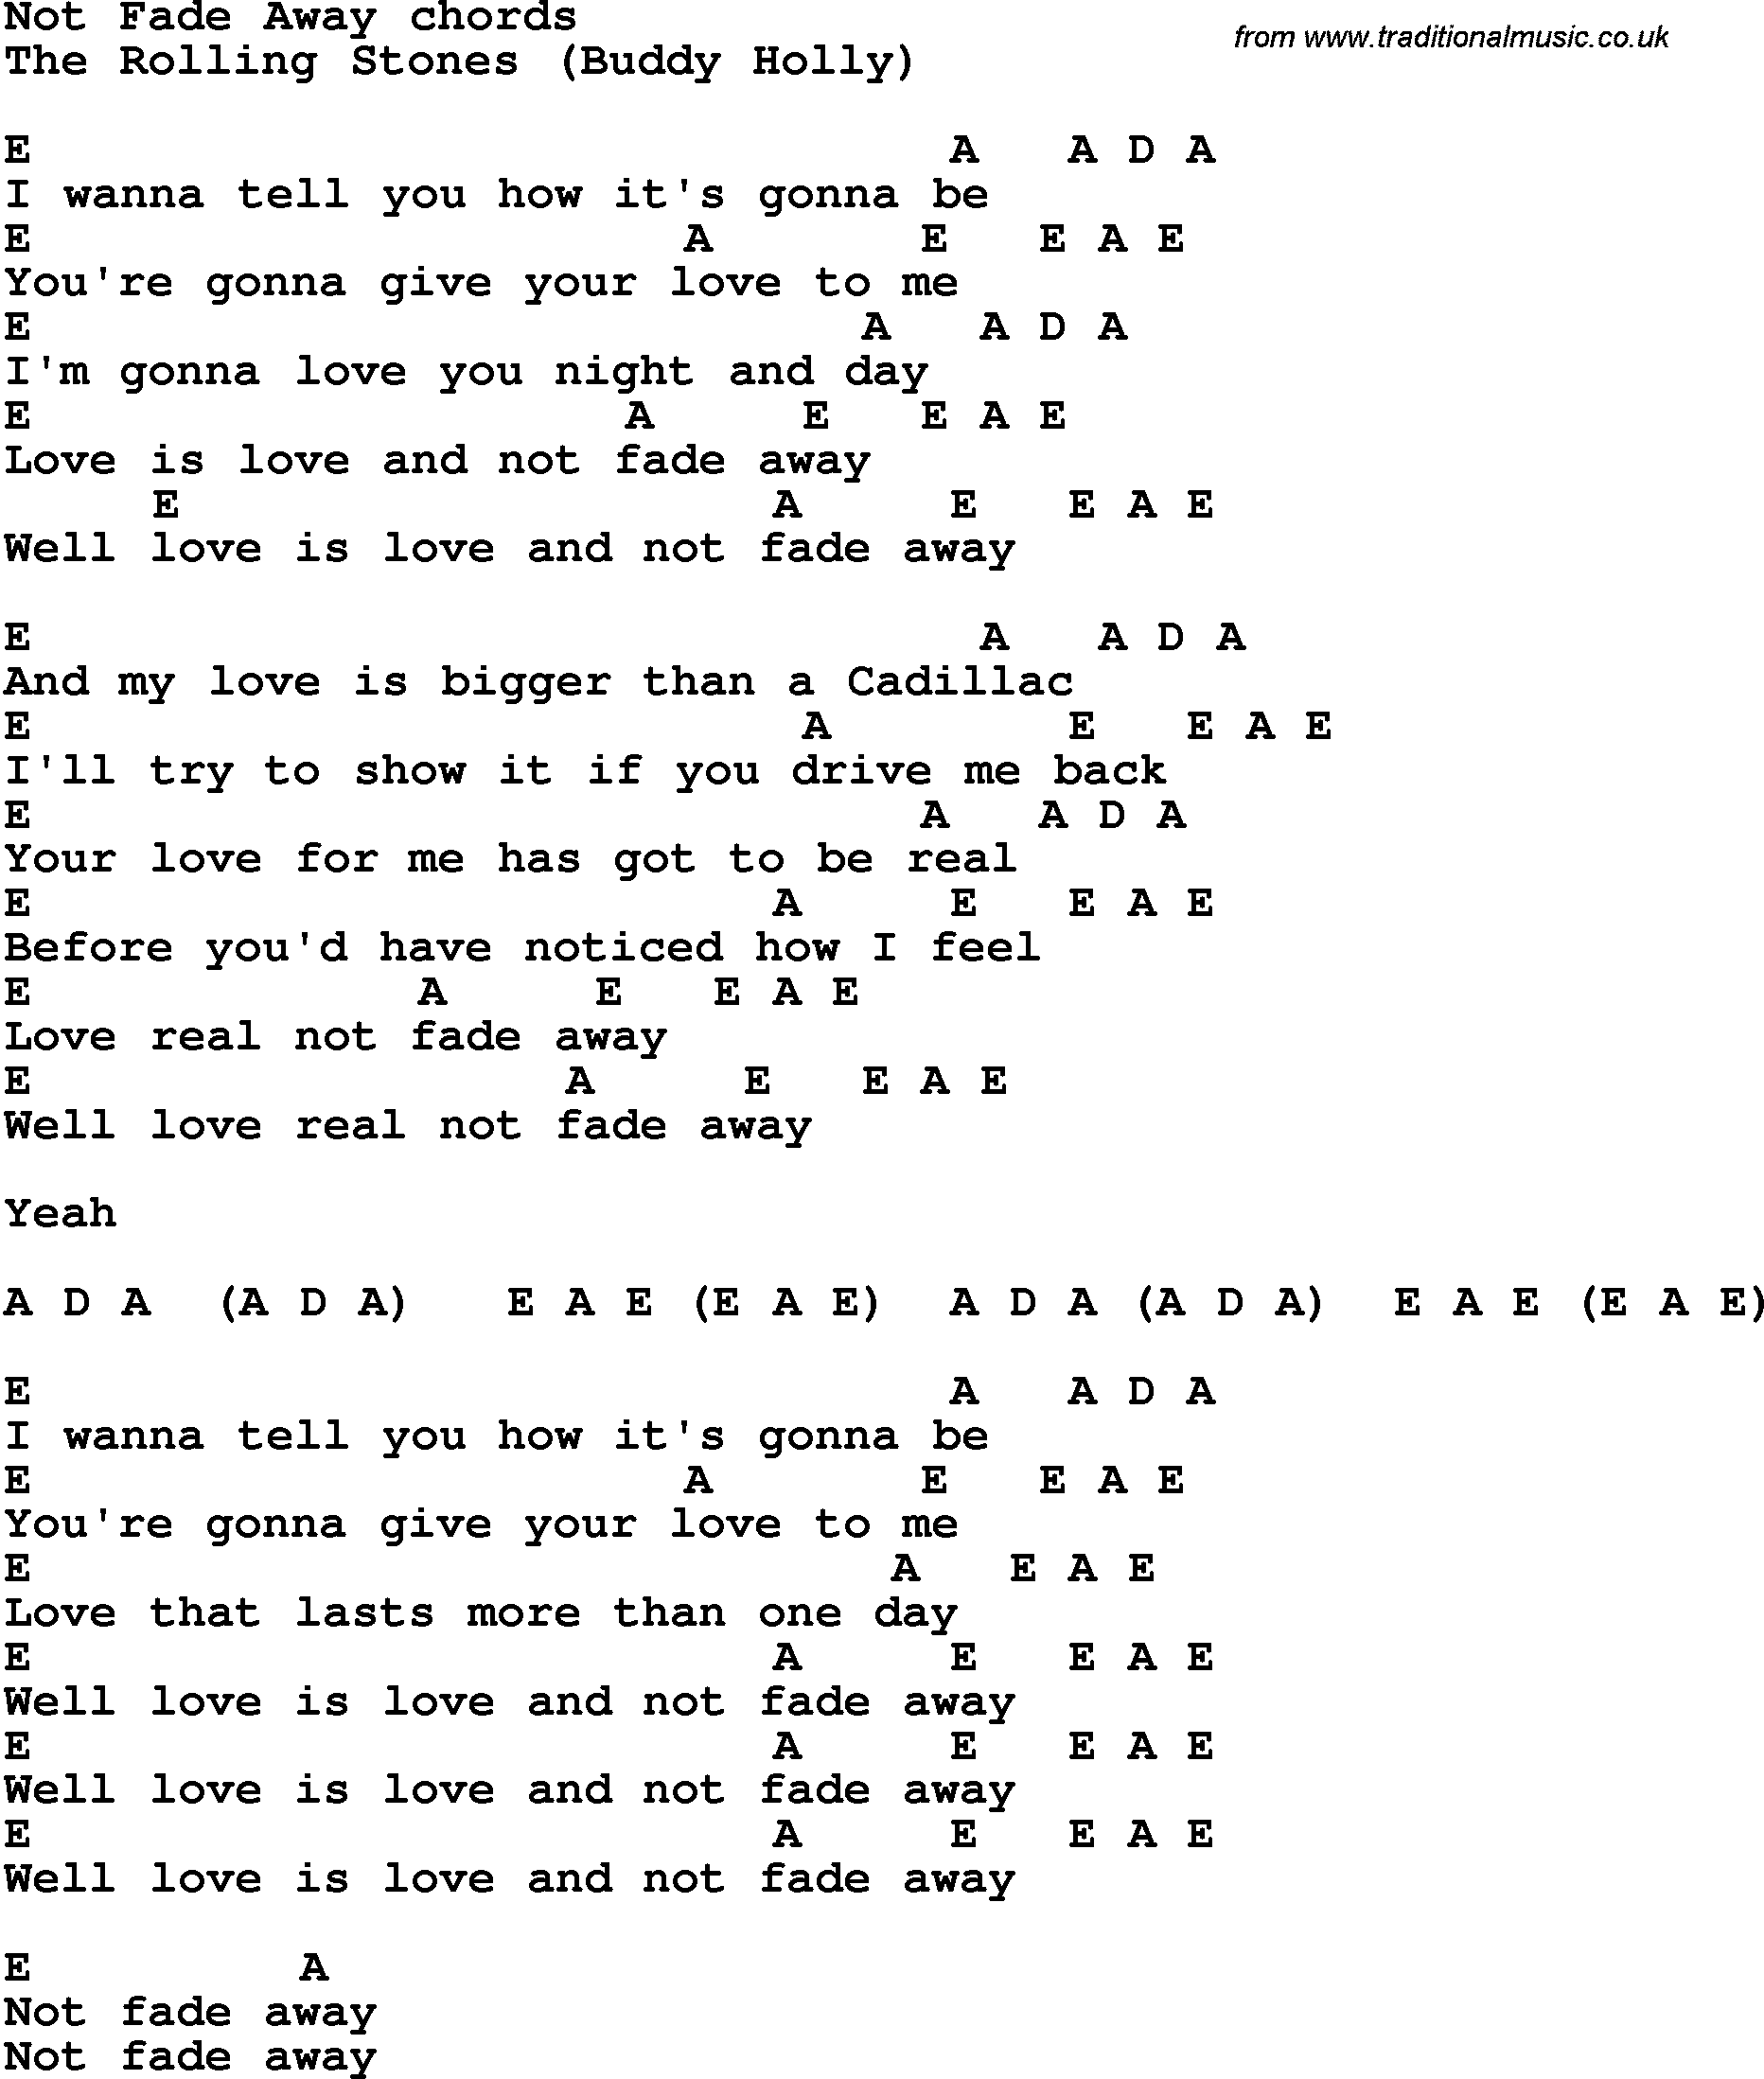 Song Lyrics with guitar chords for Not Fade Away - The Rolling Stones